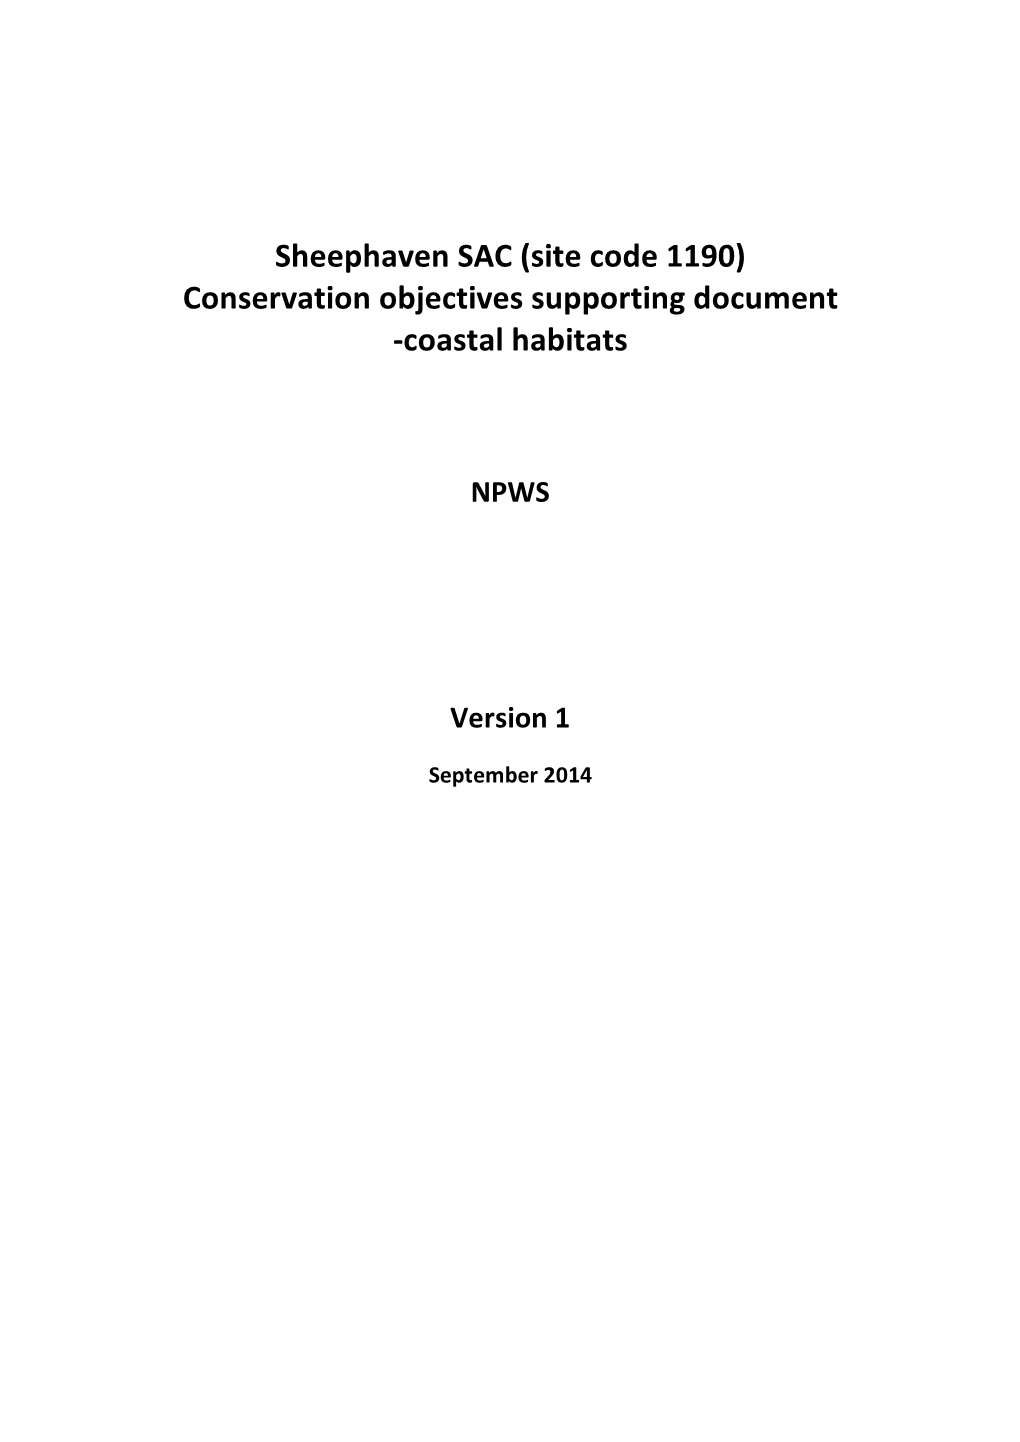 Sheephaven SAC (Site Code 1190) Conservation Objectives Supporting Document -Coastal Habitats